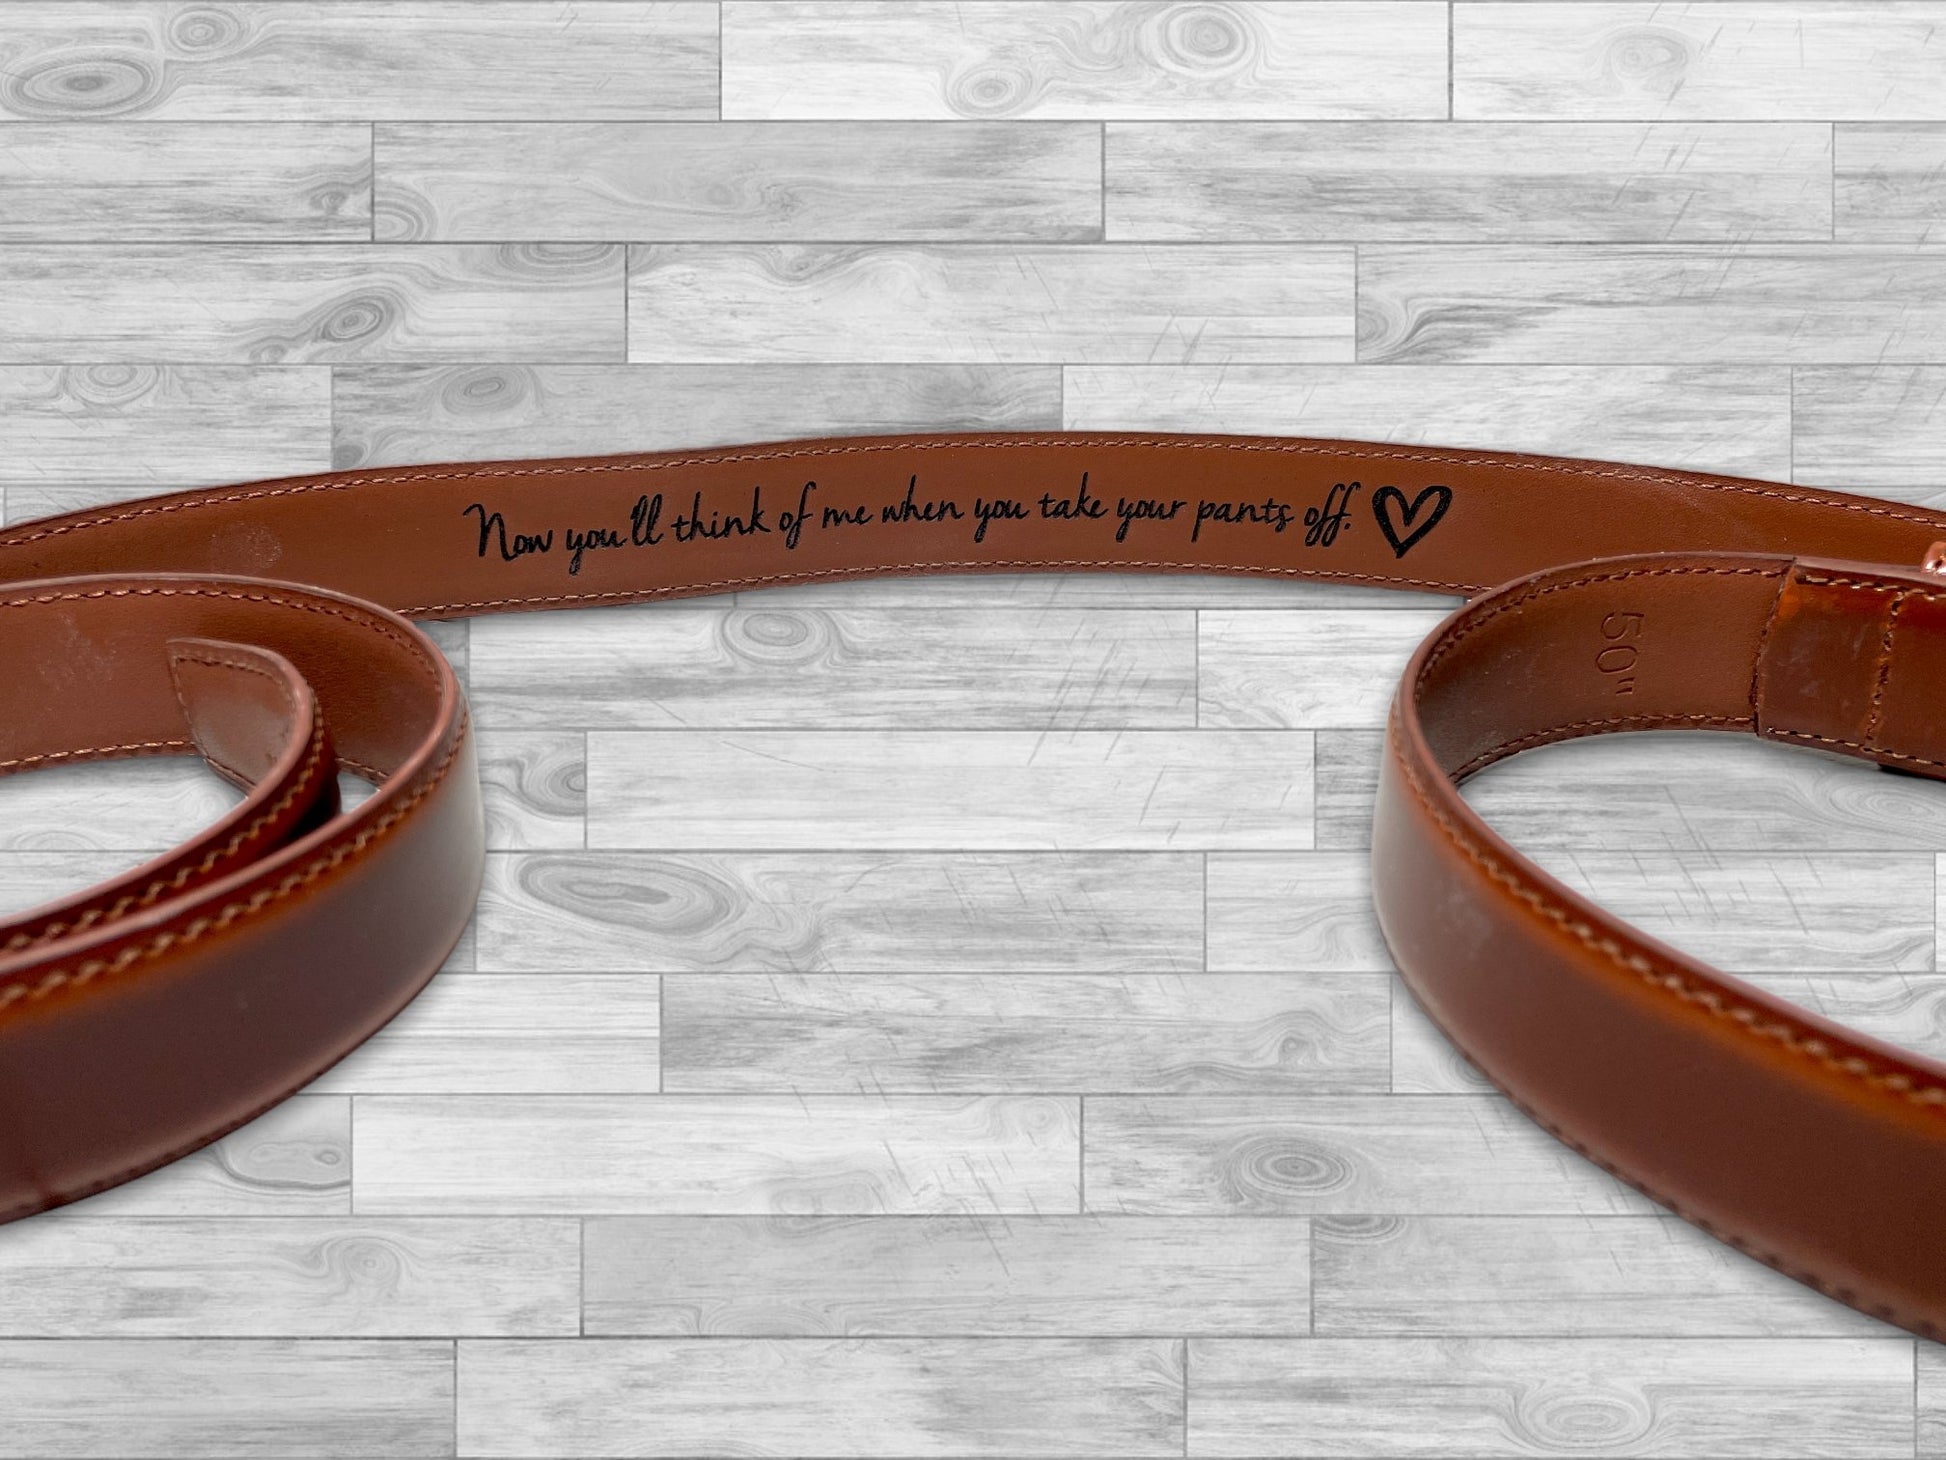 Leather Belt with Engraved Buckle